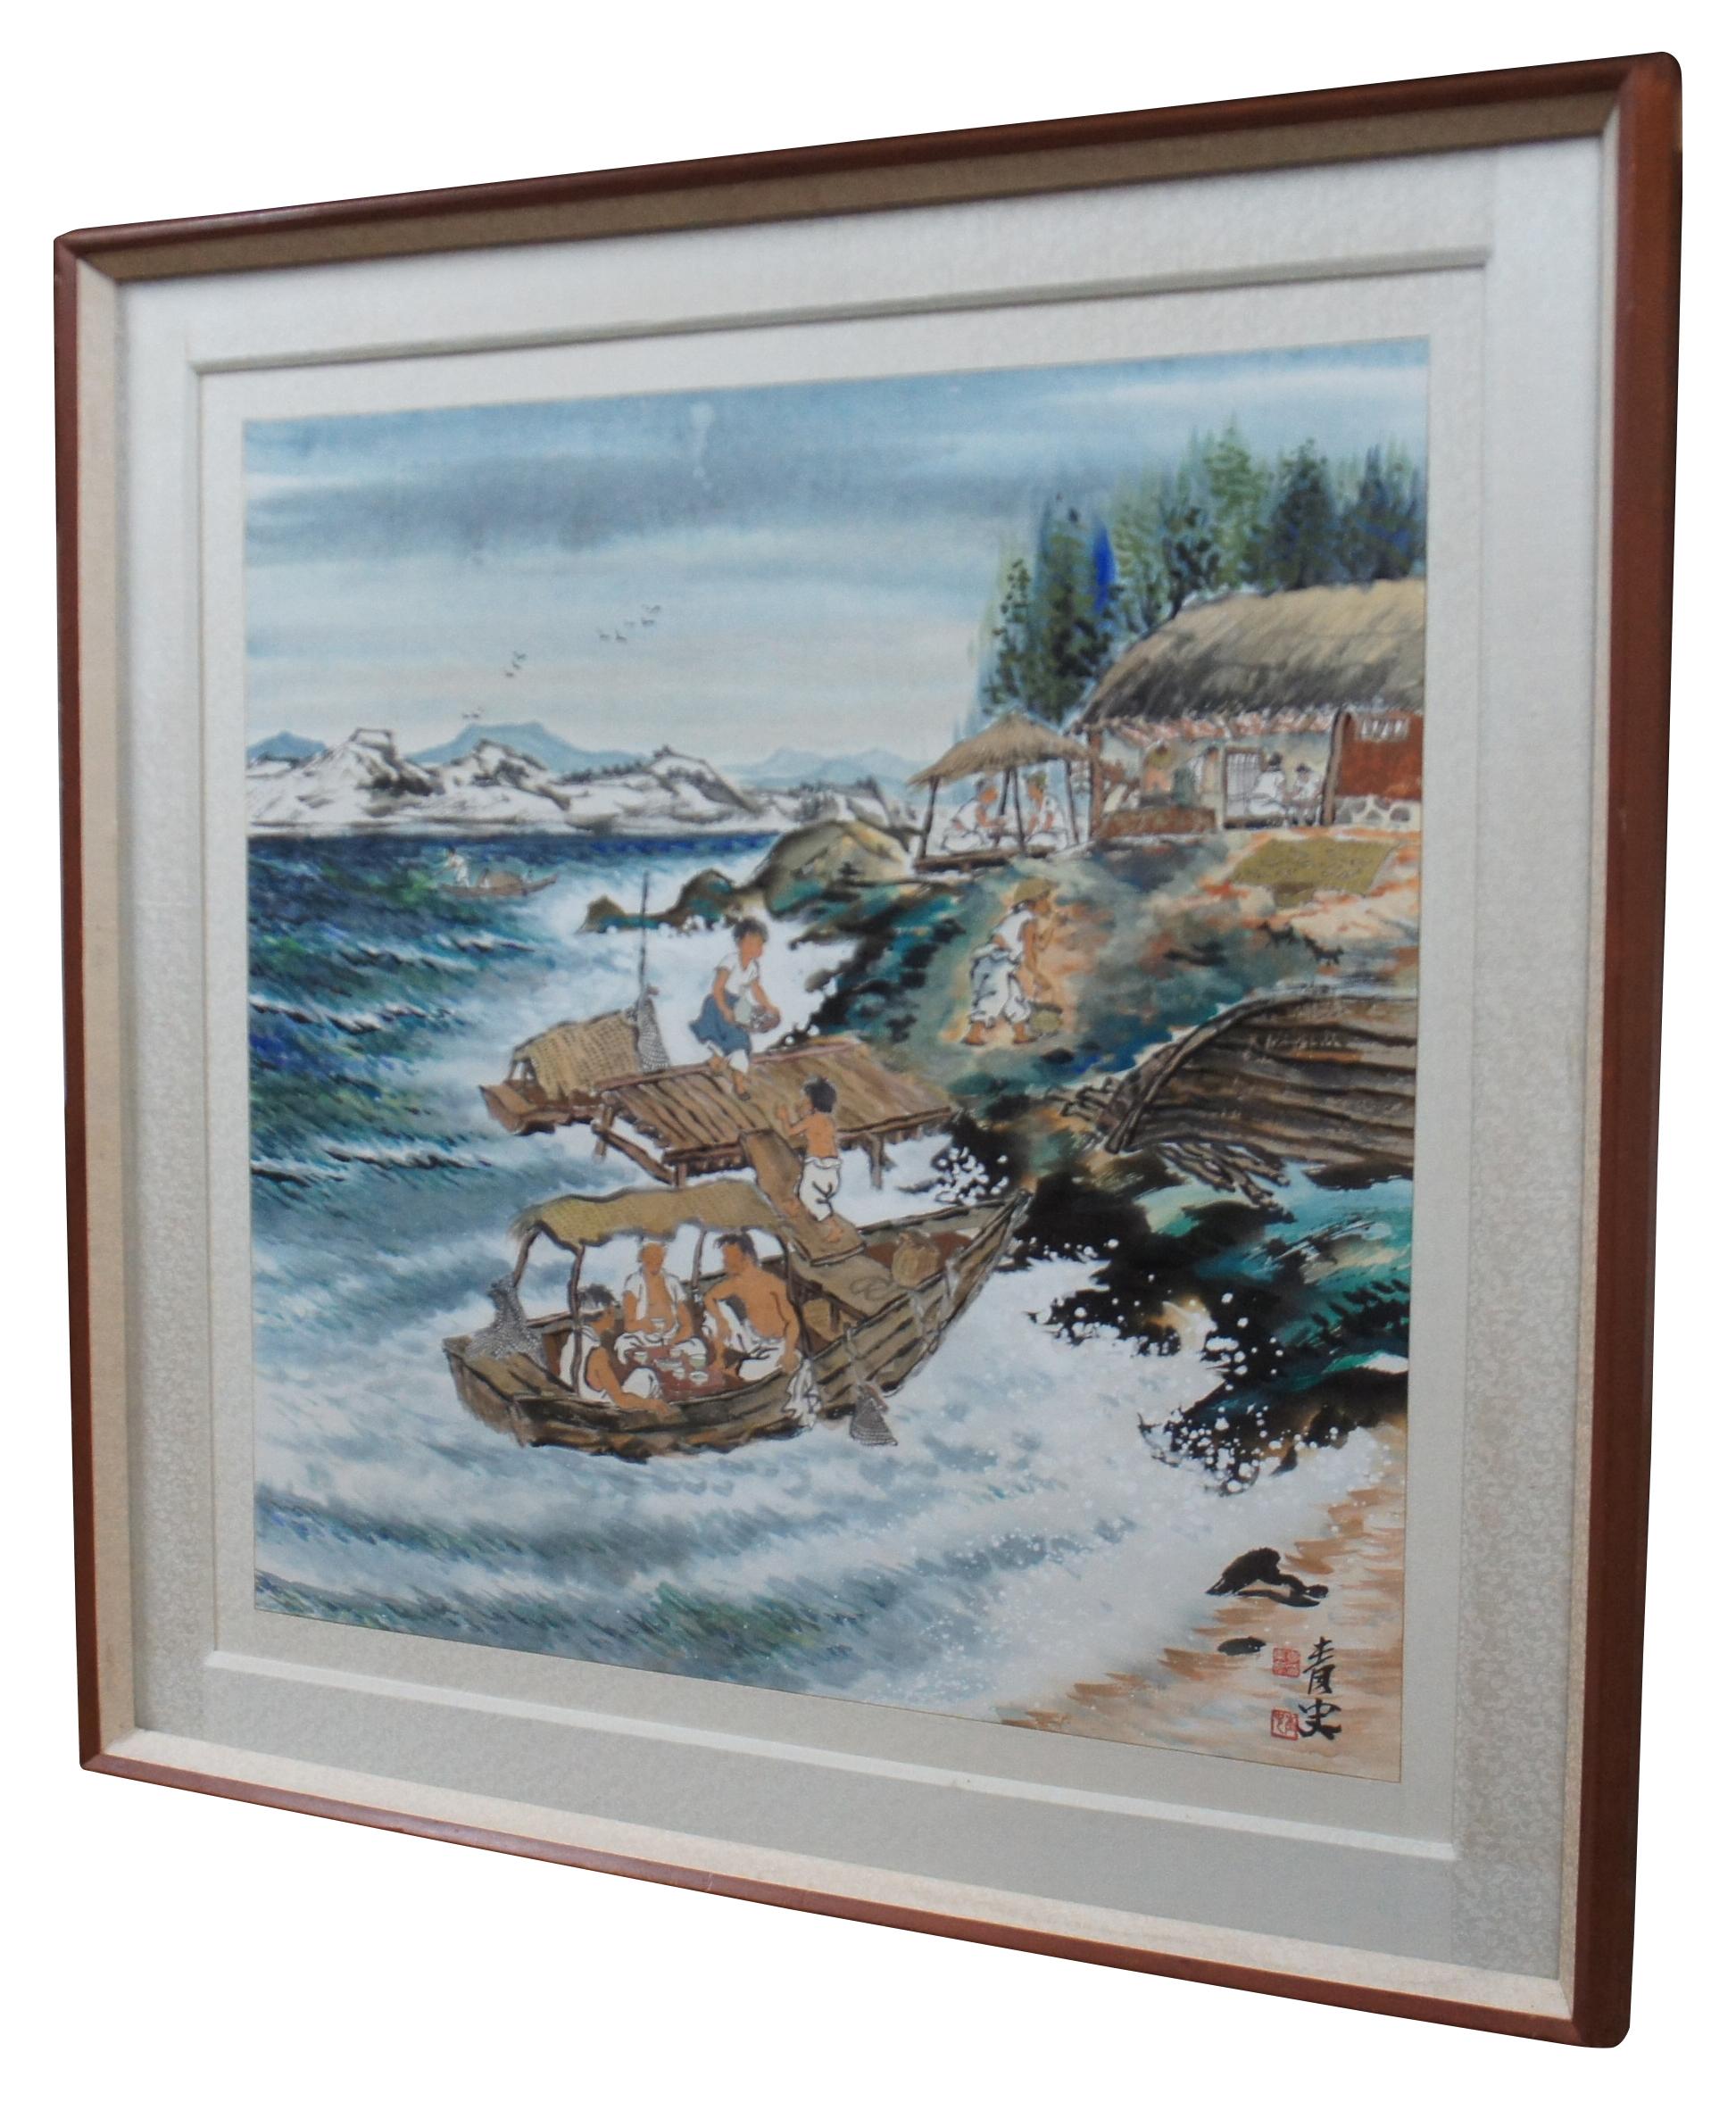 Vintage 1983 watercolor painting by Chinese/Korean artist and university lecturer Lee Dong-Sik. Purchase at the Invitational Exhibition of Lee, Dong Sik Oriental Painting at the Sam Il Gallery. Painting shows a seascape scene of figures working /